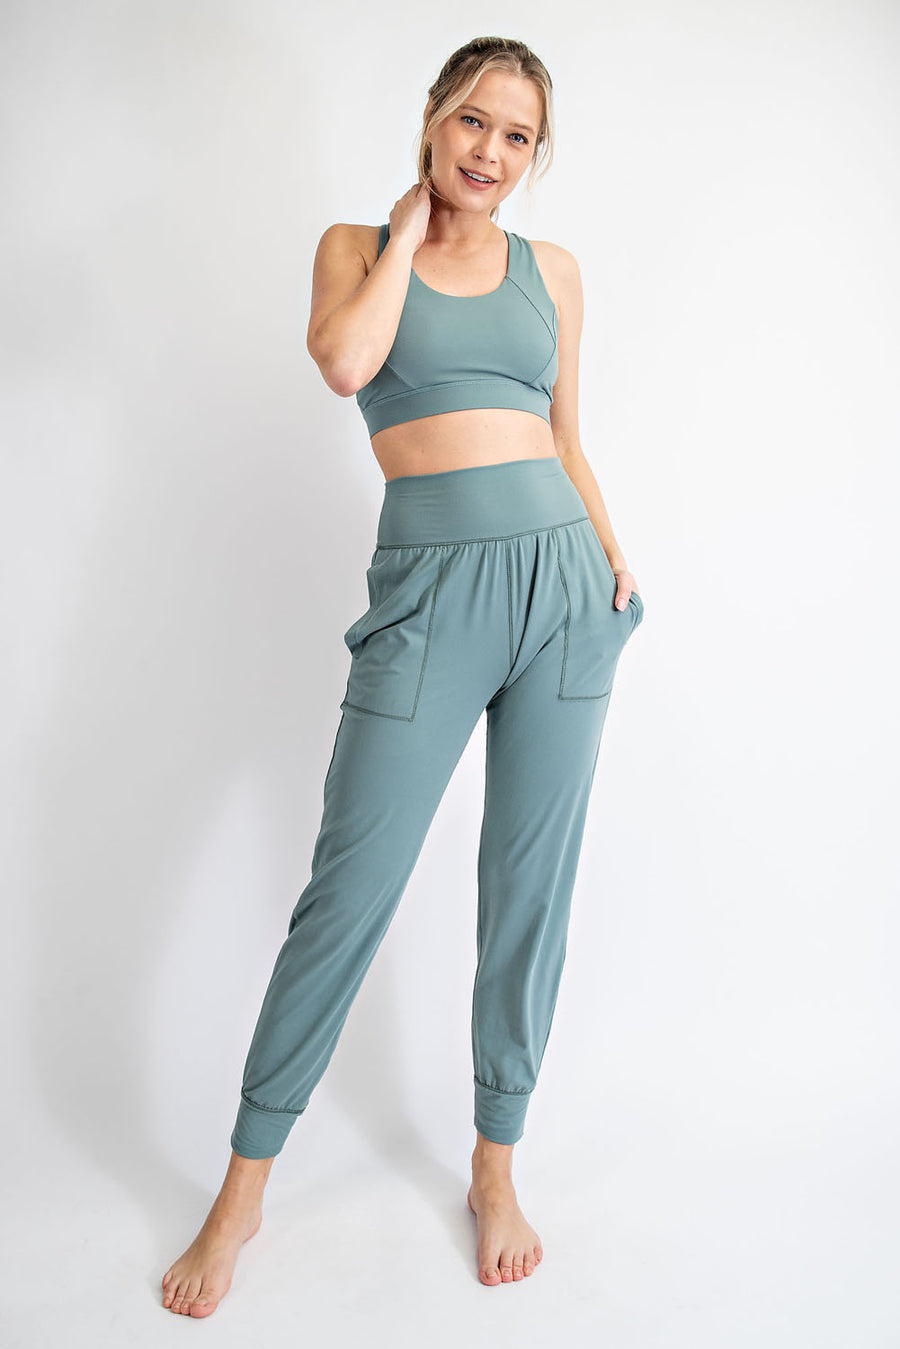 Terri | Butter Soft Joggers with Pockets | Tidewater Teal